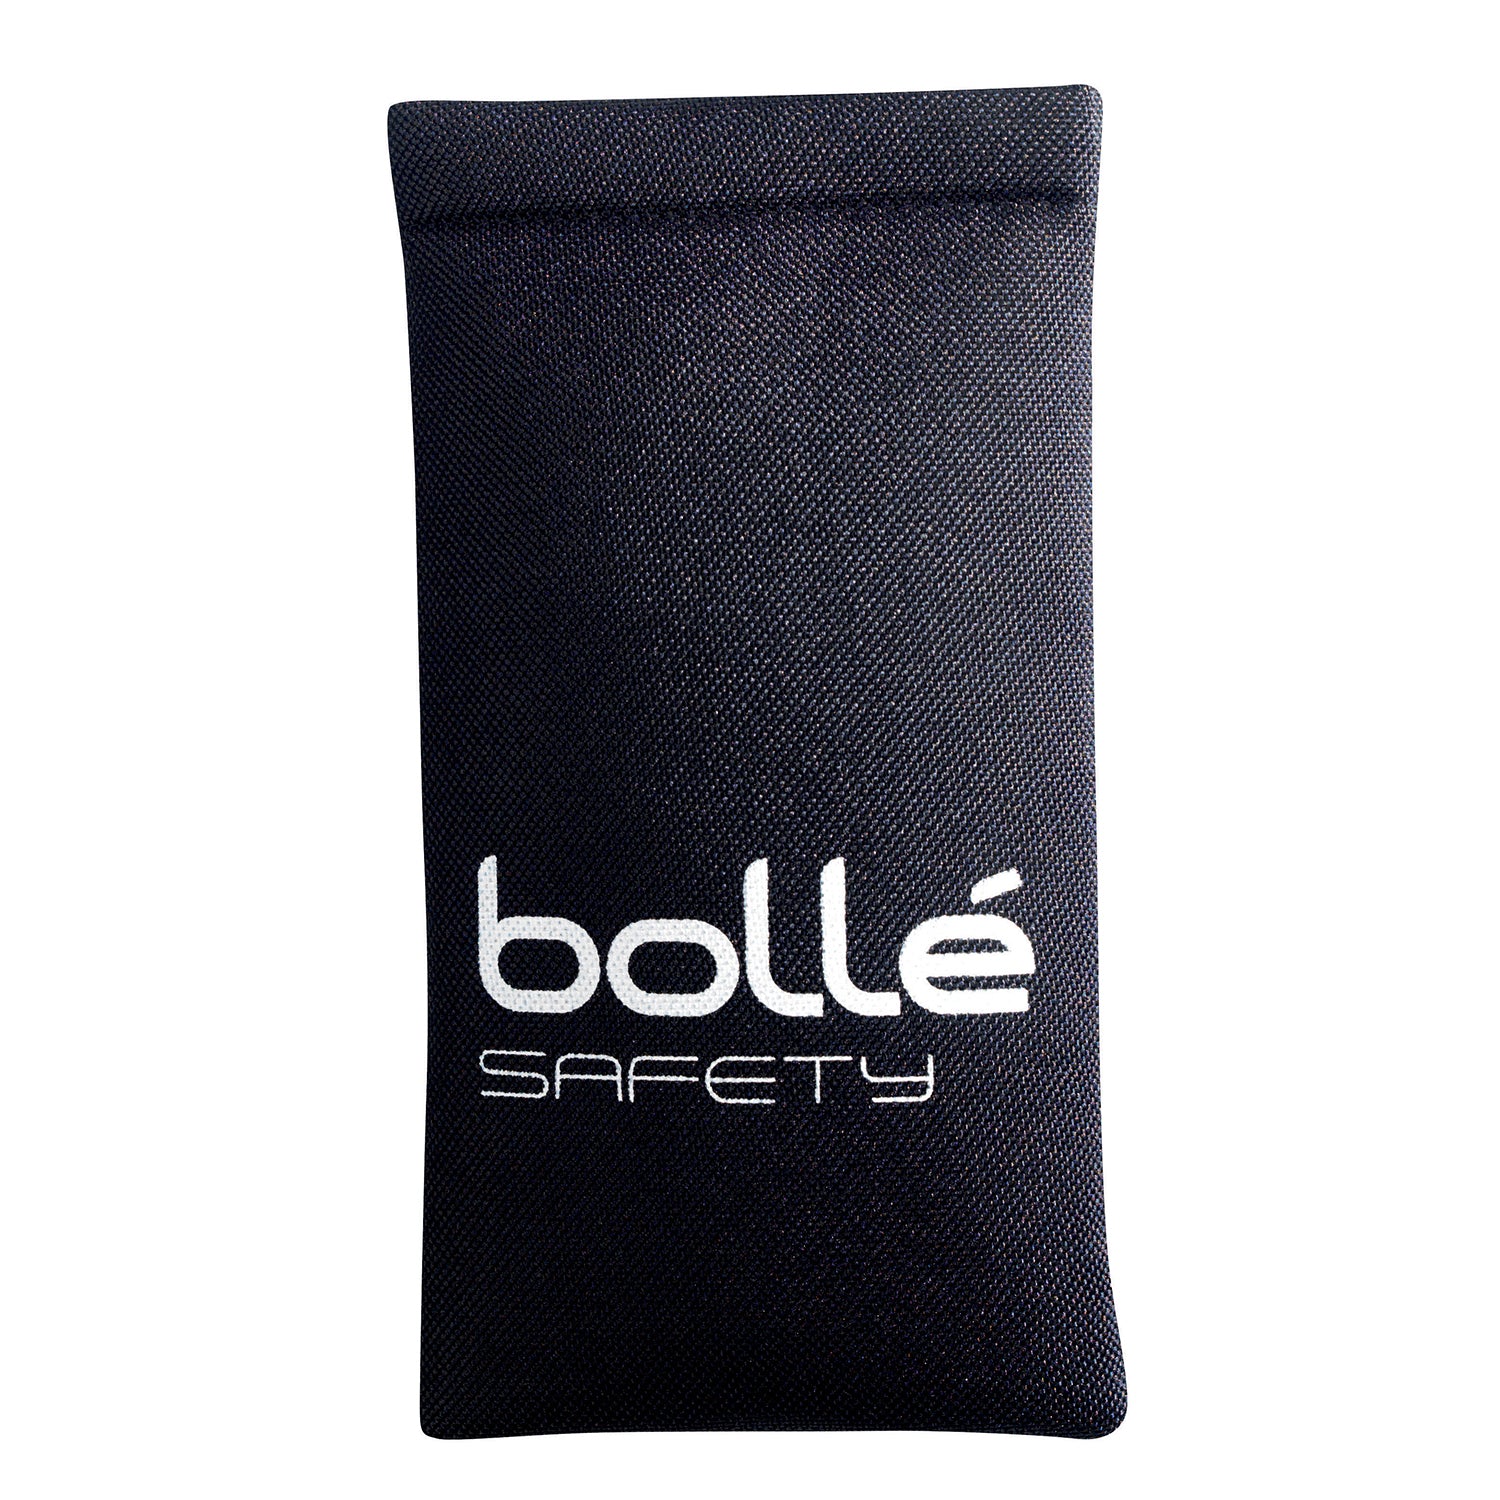 Safety Glasses Case -Bolle ETUIS - Polyester Clic-Clac 